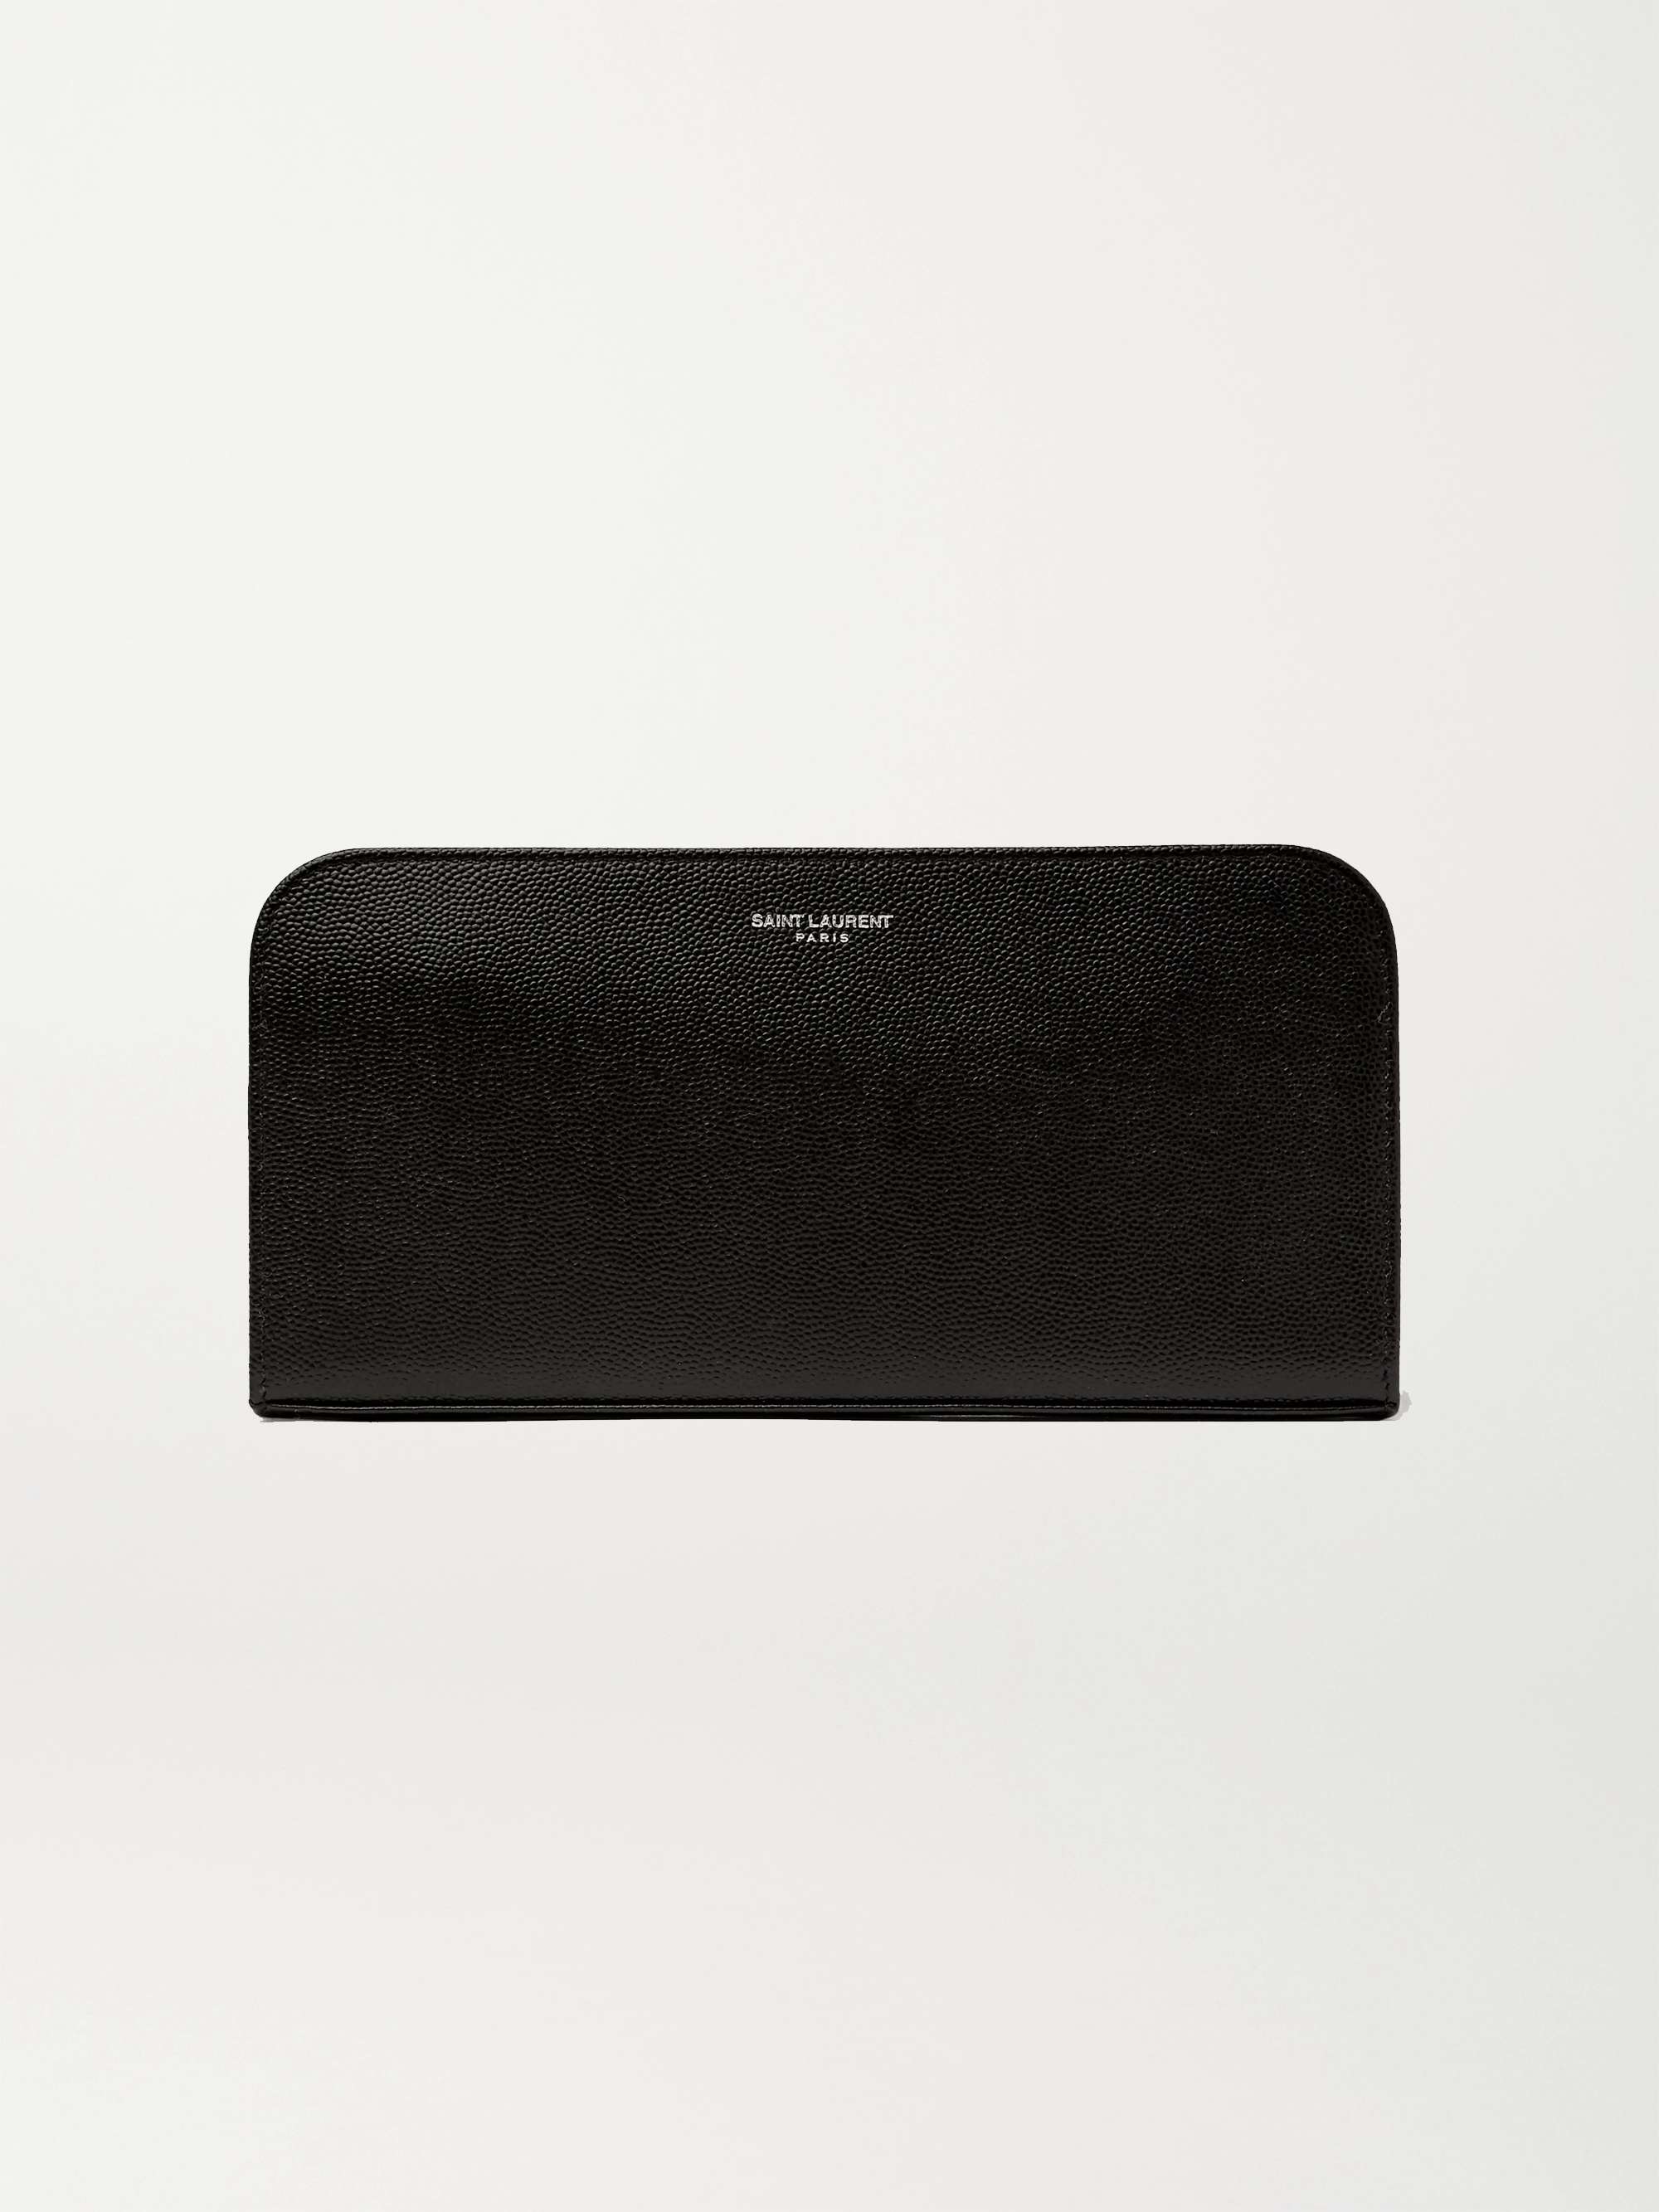 PAUL SMITH Colour-Block Textured-Leather Zipped Wallet | MR PORTER